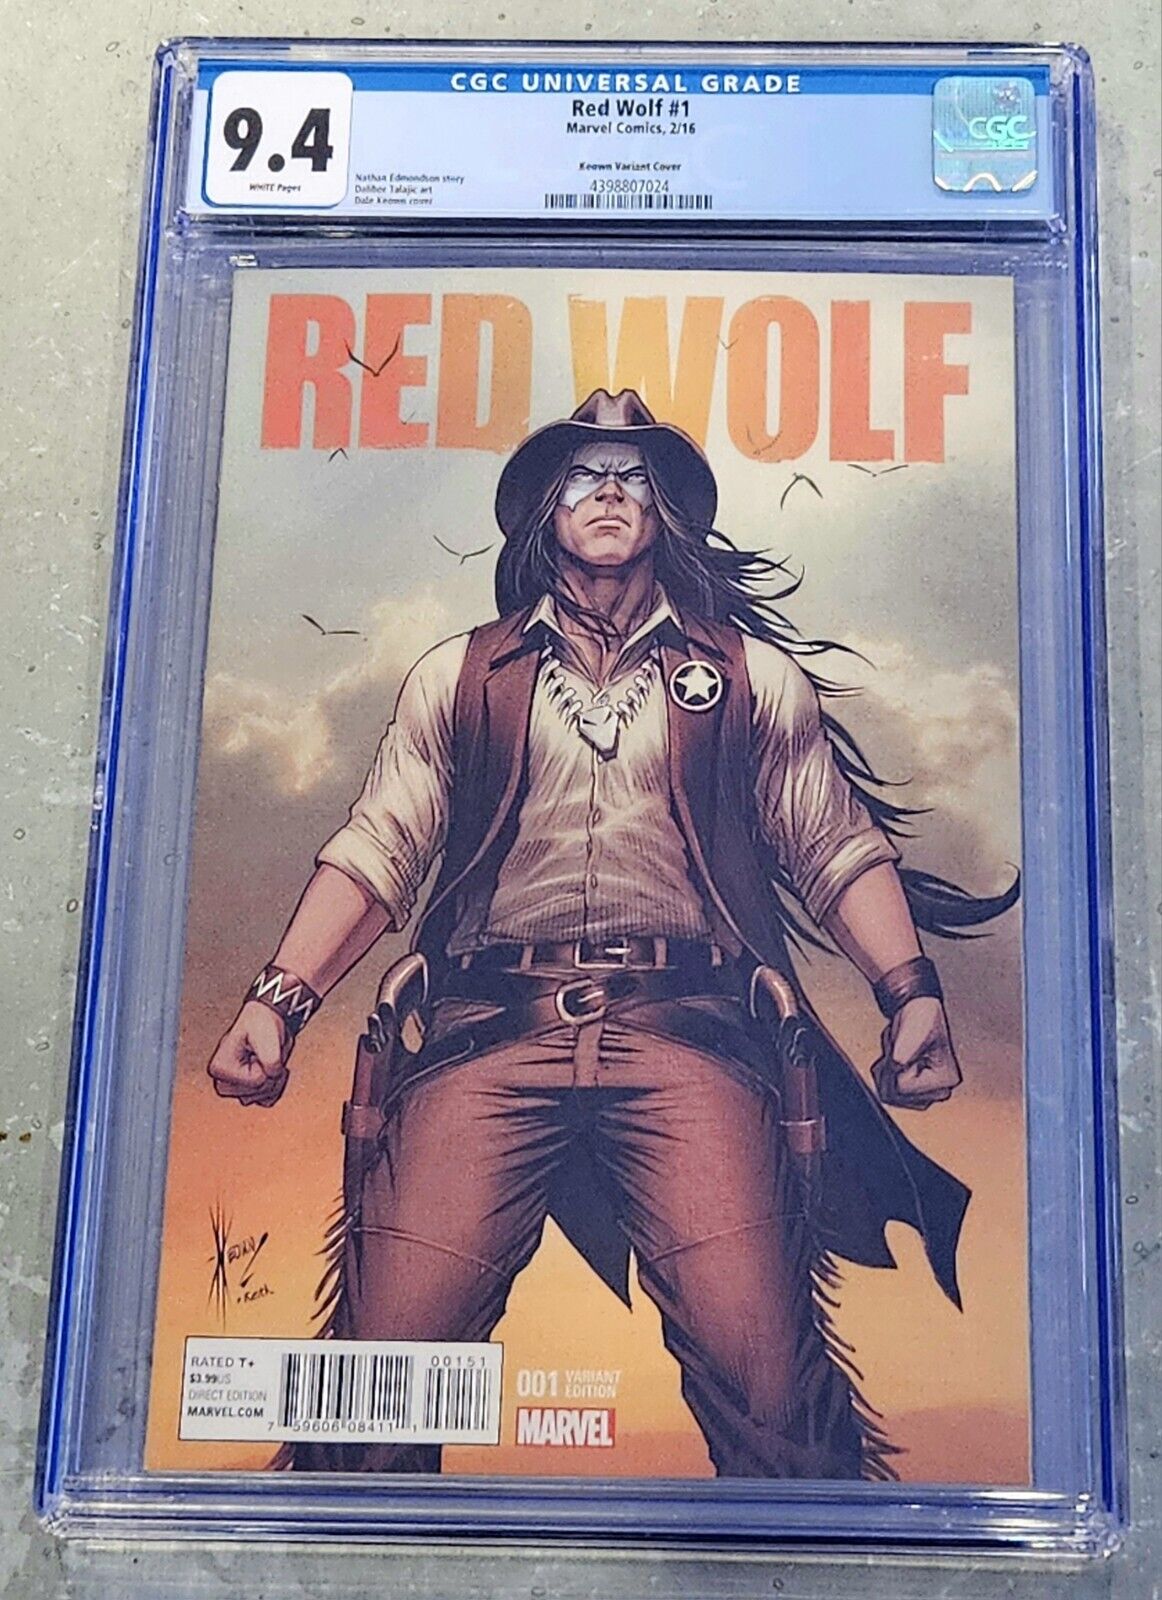 Red Wolf #1 Dale Keown 1:25 Variant - CGC 9.4 - 2016 Marvel Comics